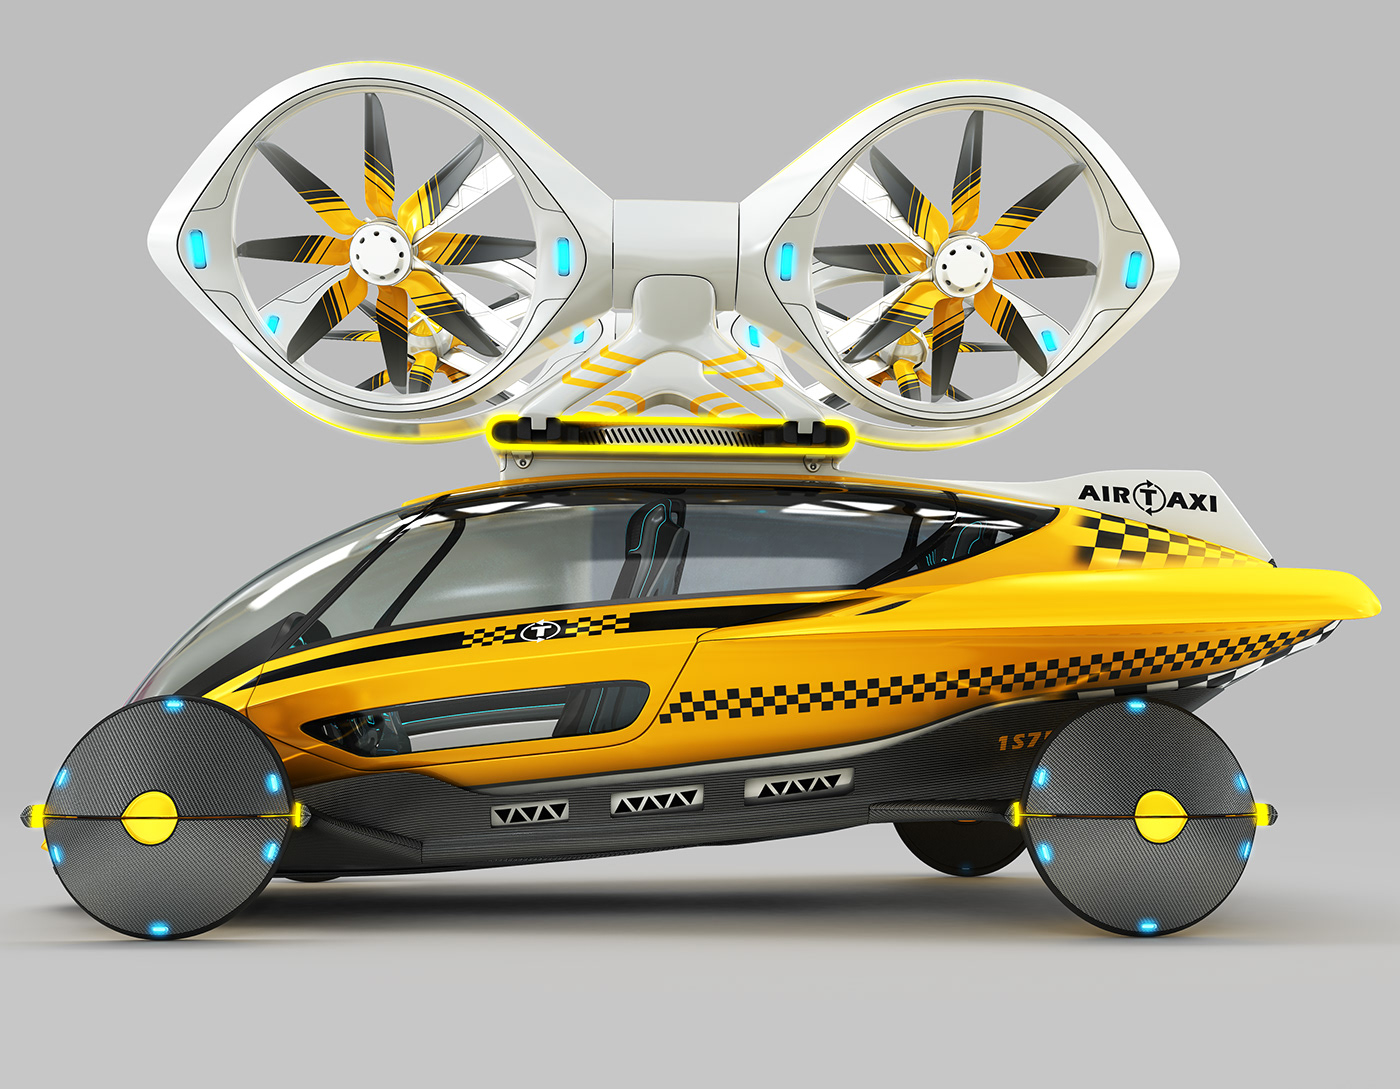 drone Vehicle automobile car concept city Urban people Copter taxi cab